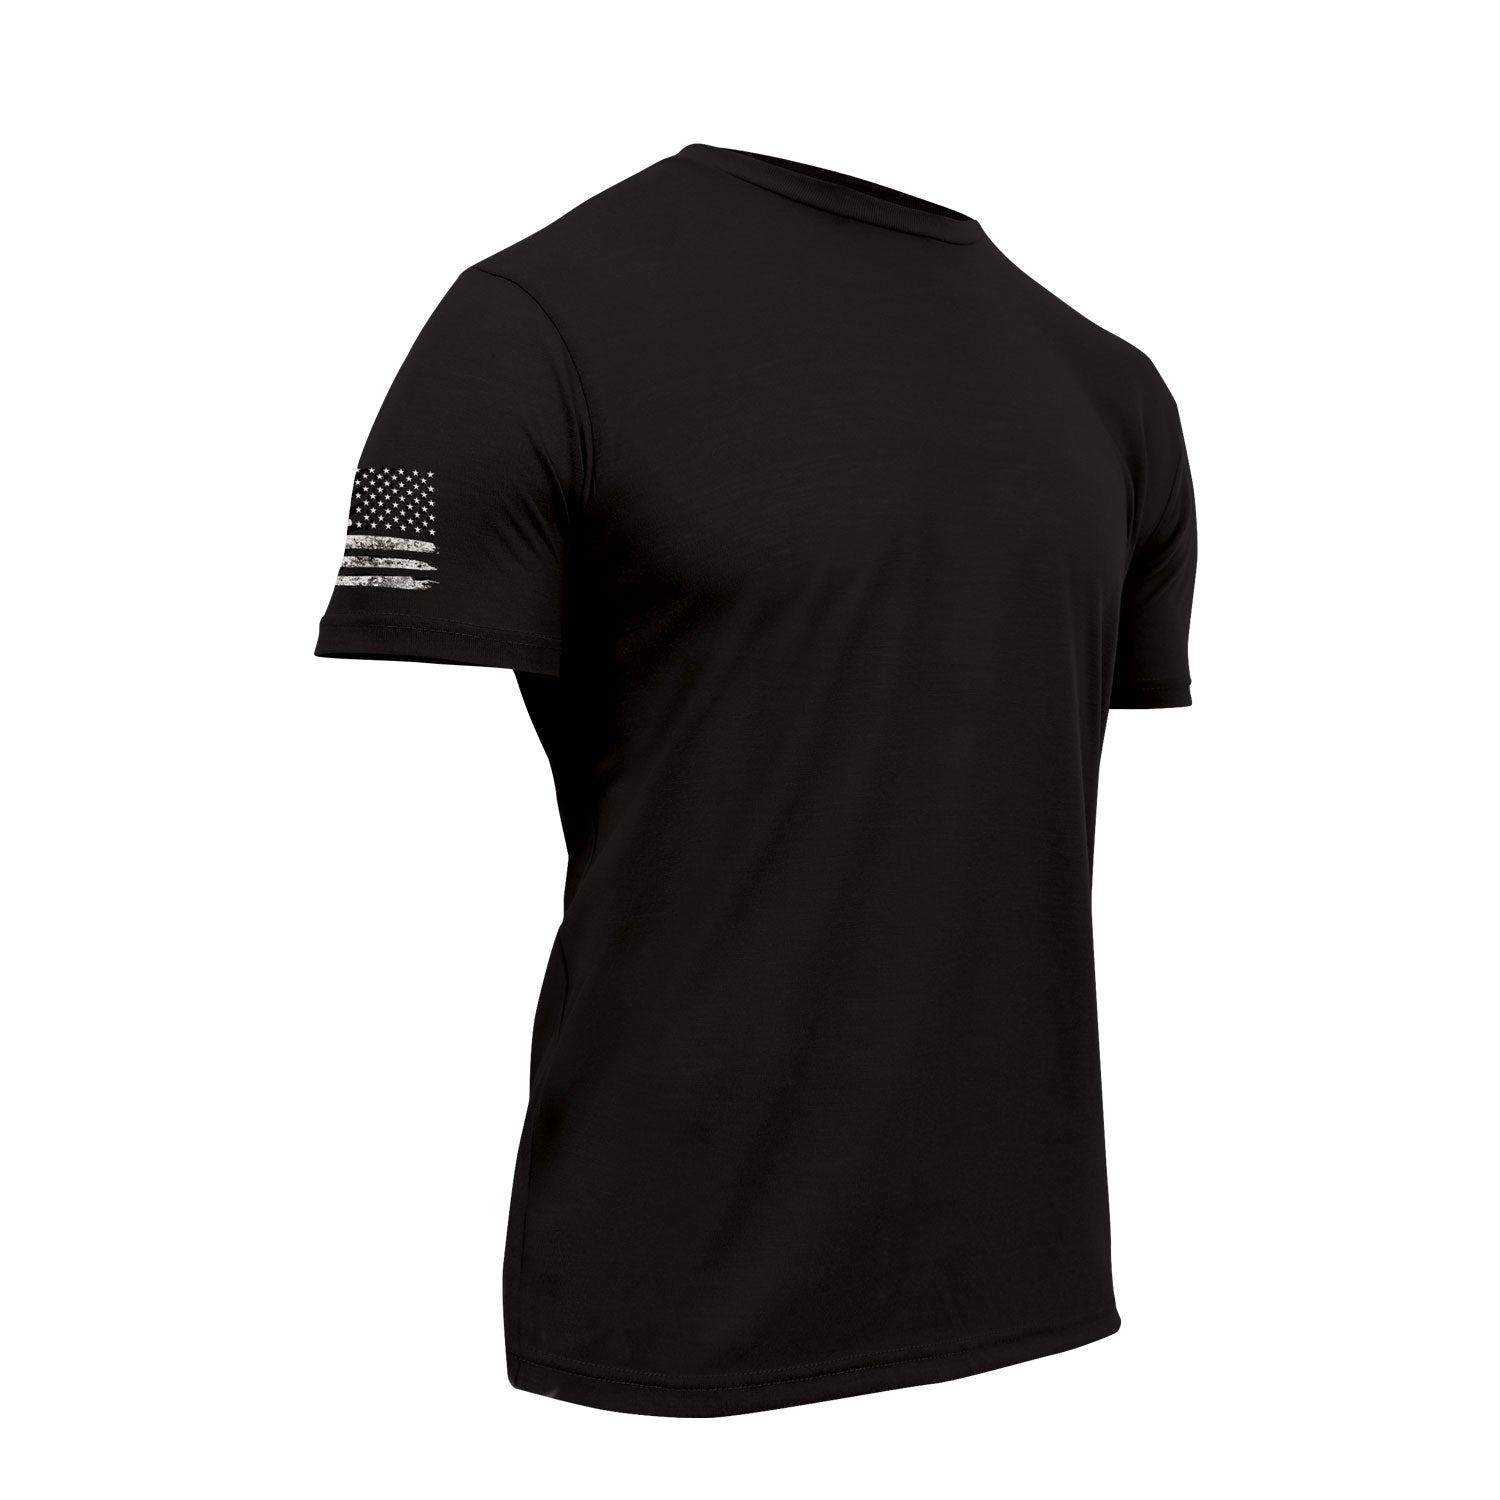 [AR 670-1] Poly Moisture Wicking Athletic Fit T-Shirts Black